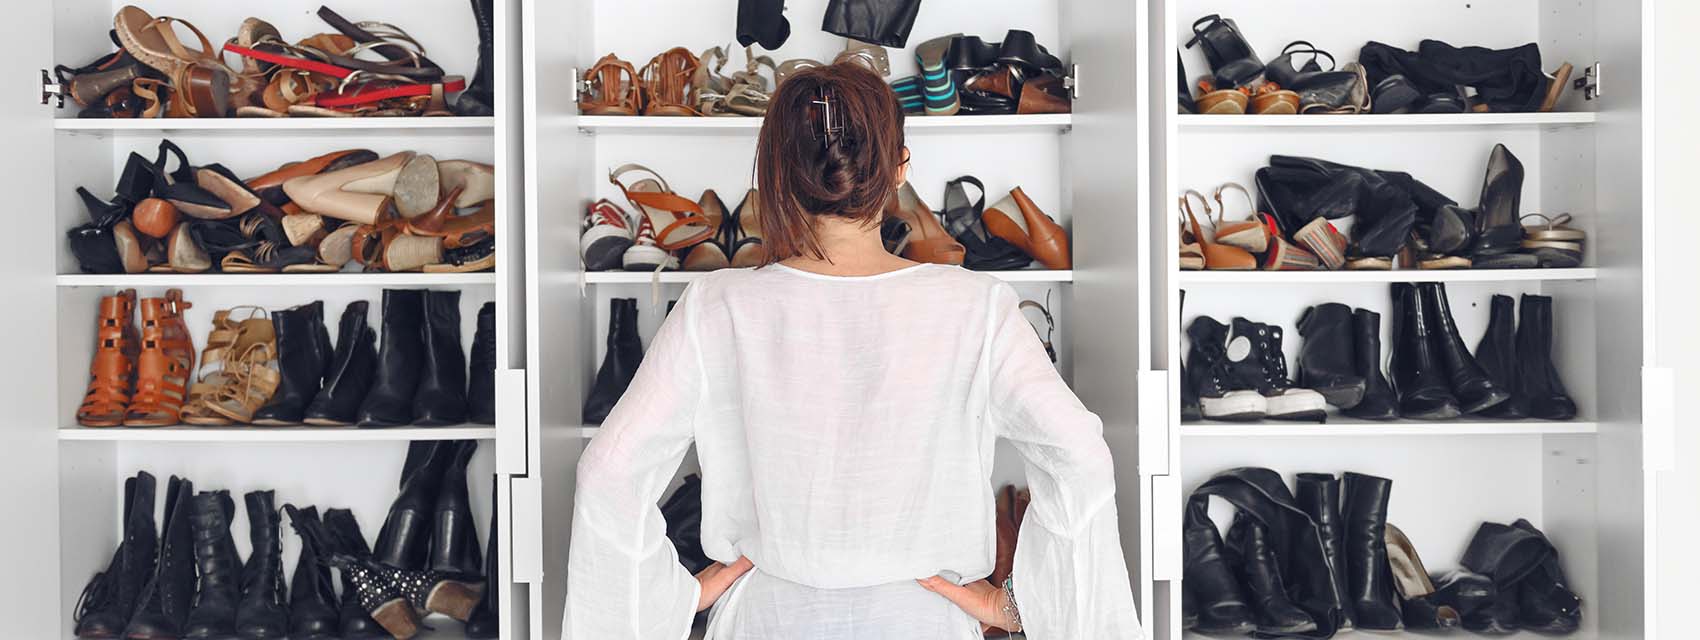 woman standing in front of her messy shoe closet